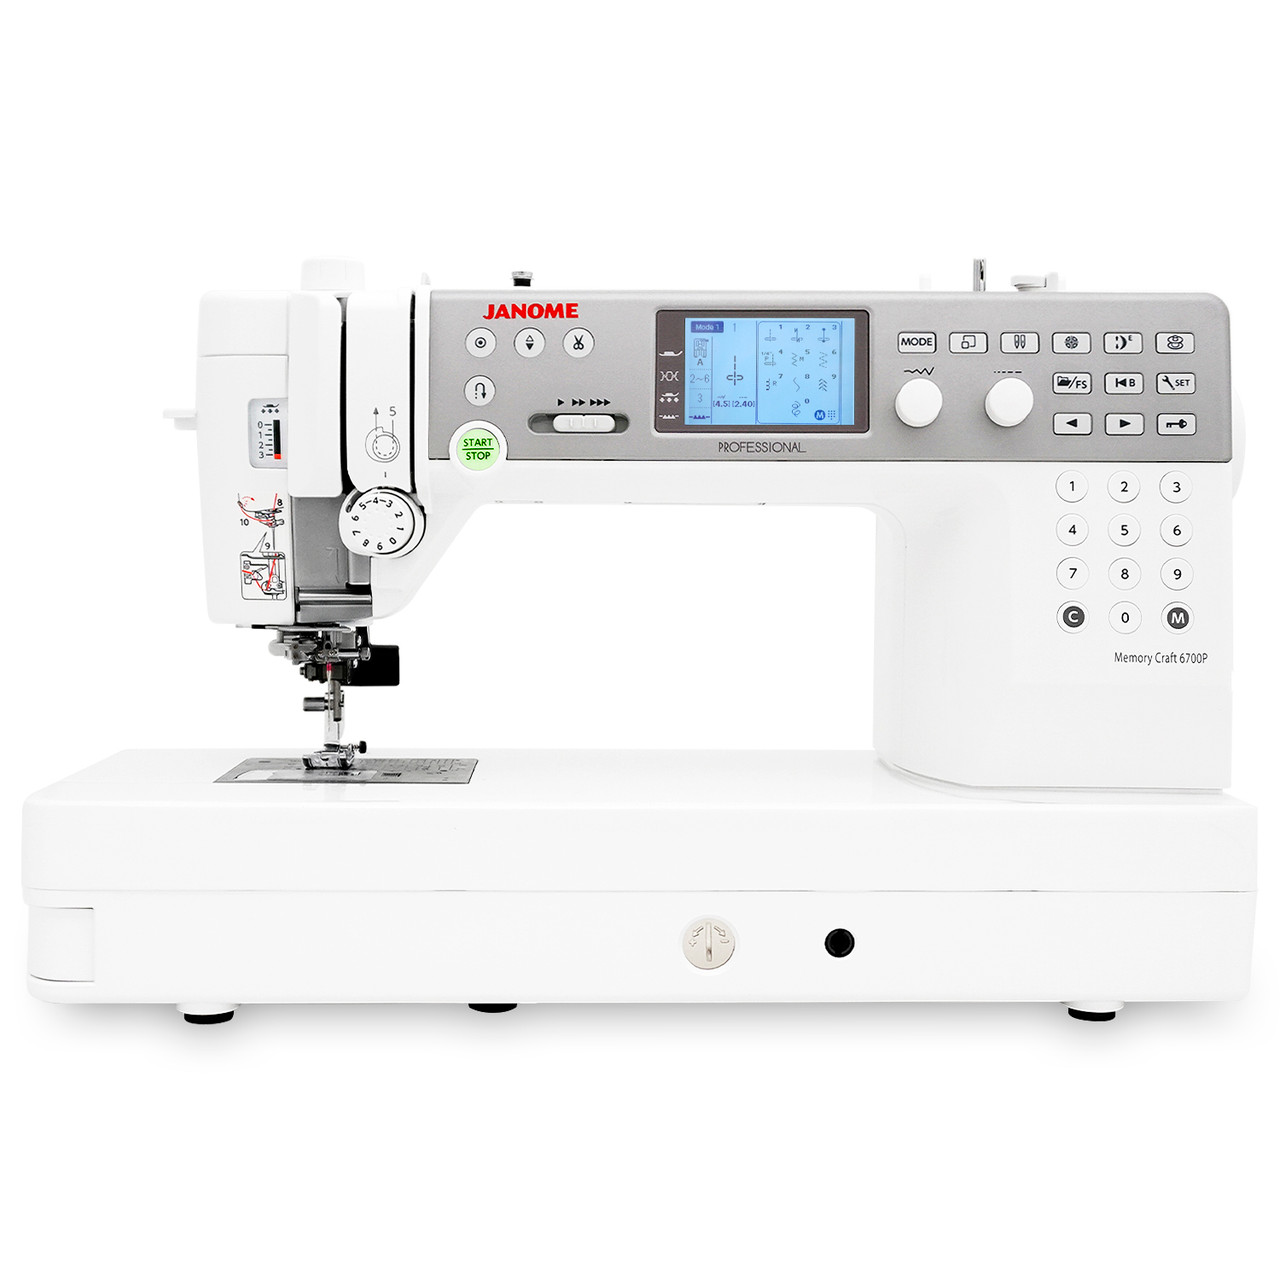 Janome Memory Craft 6300P Sewing and Embroidery Machine